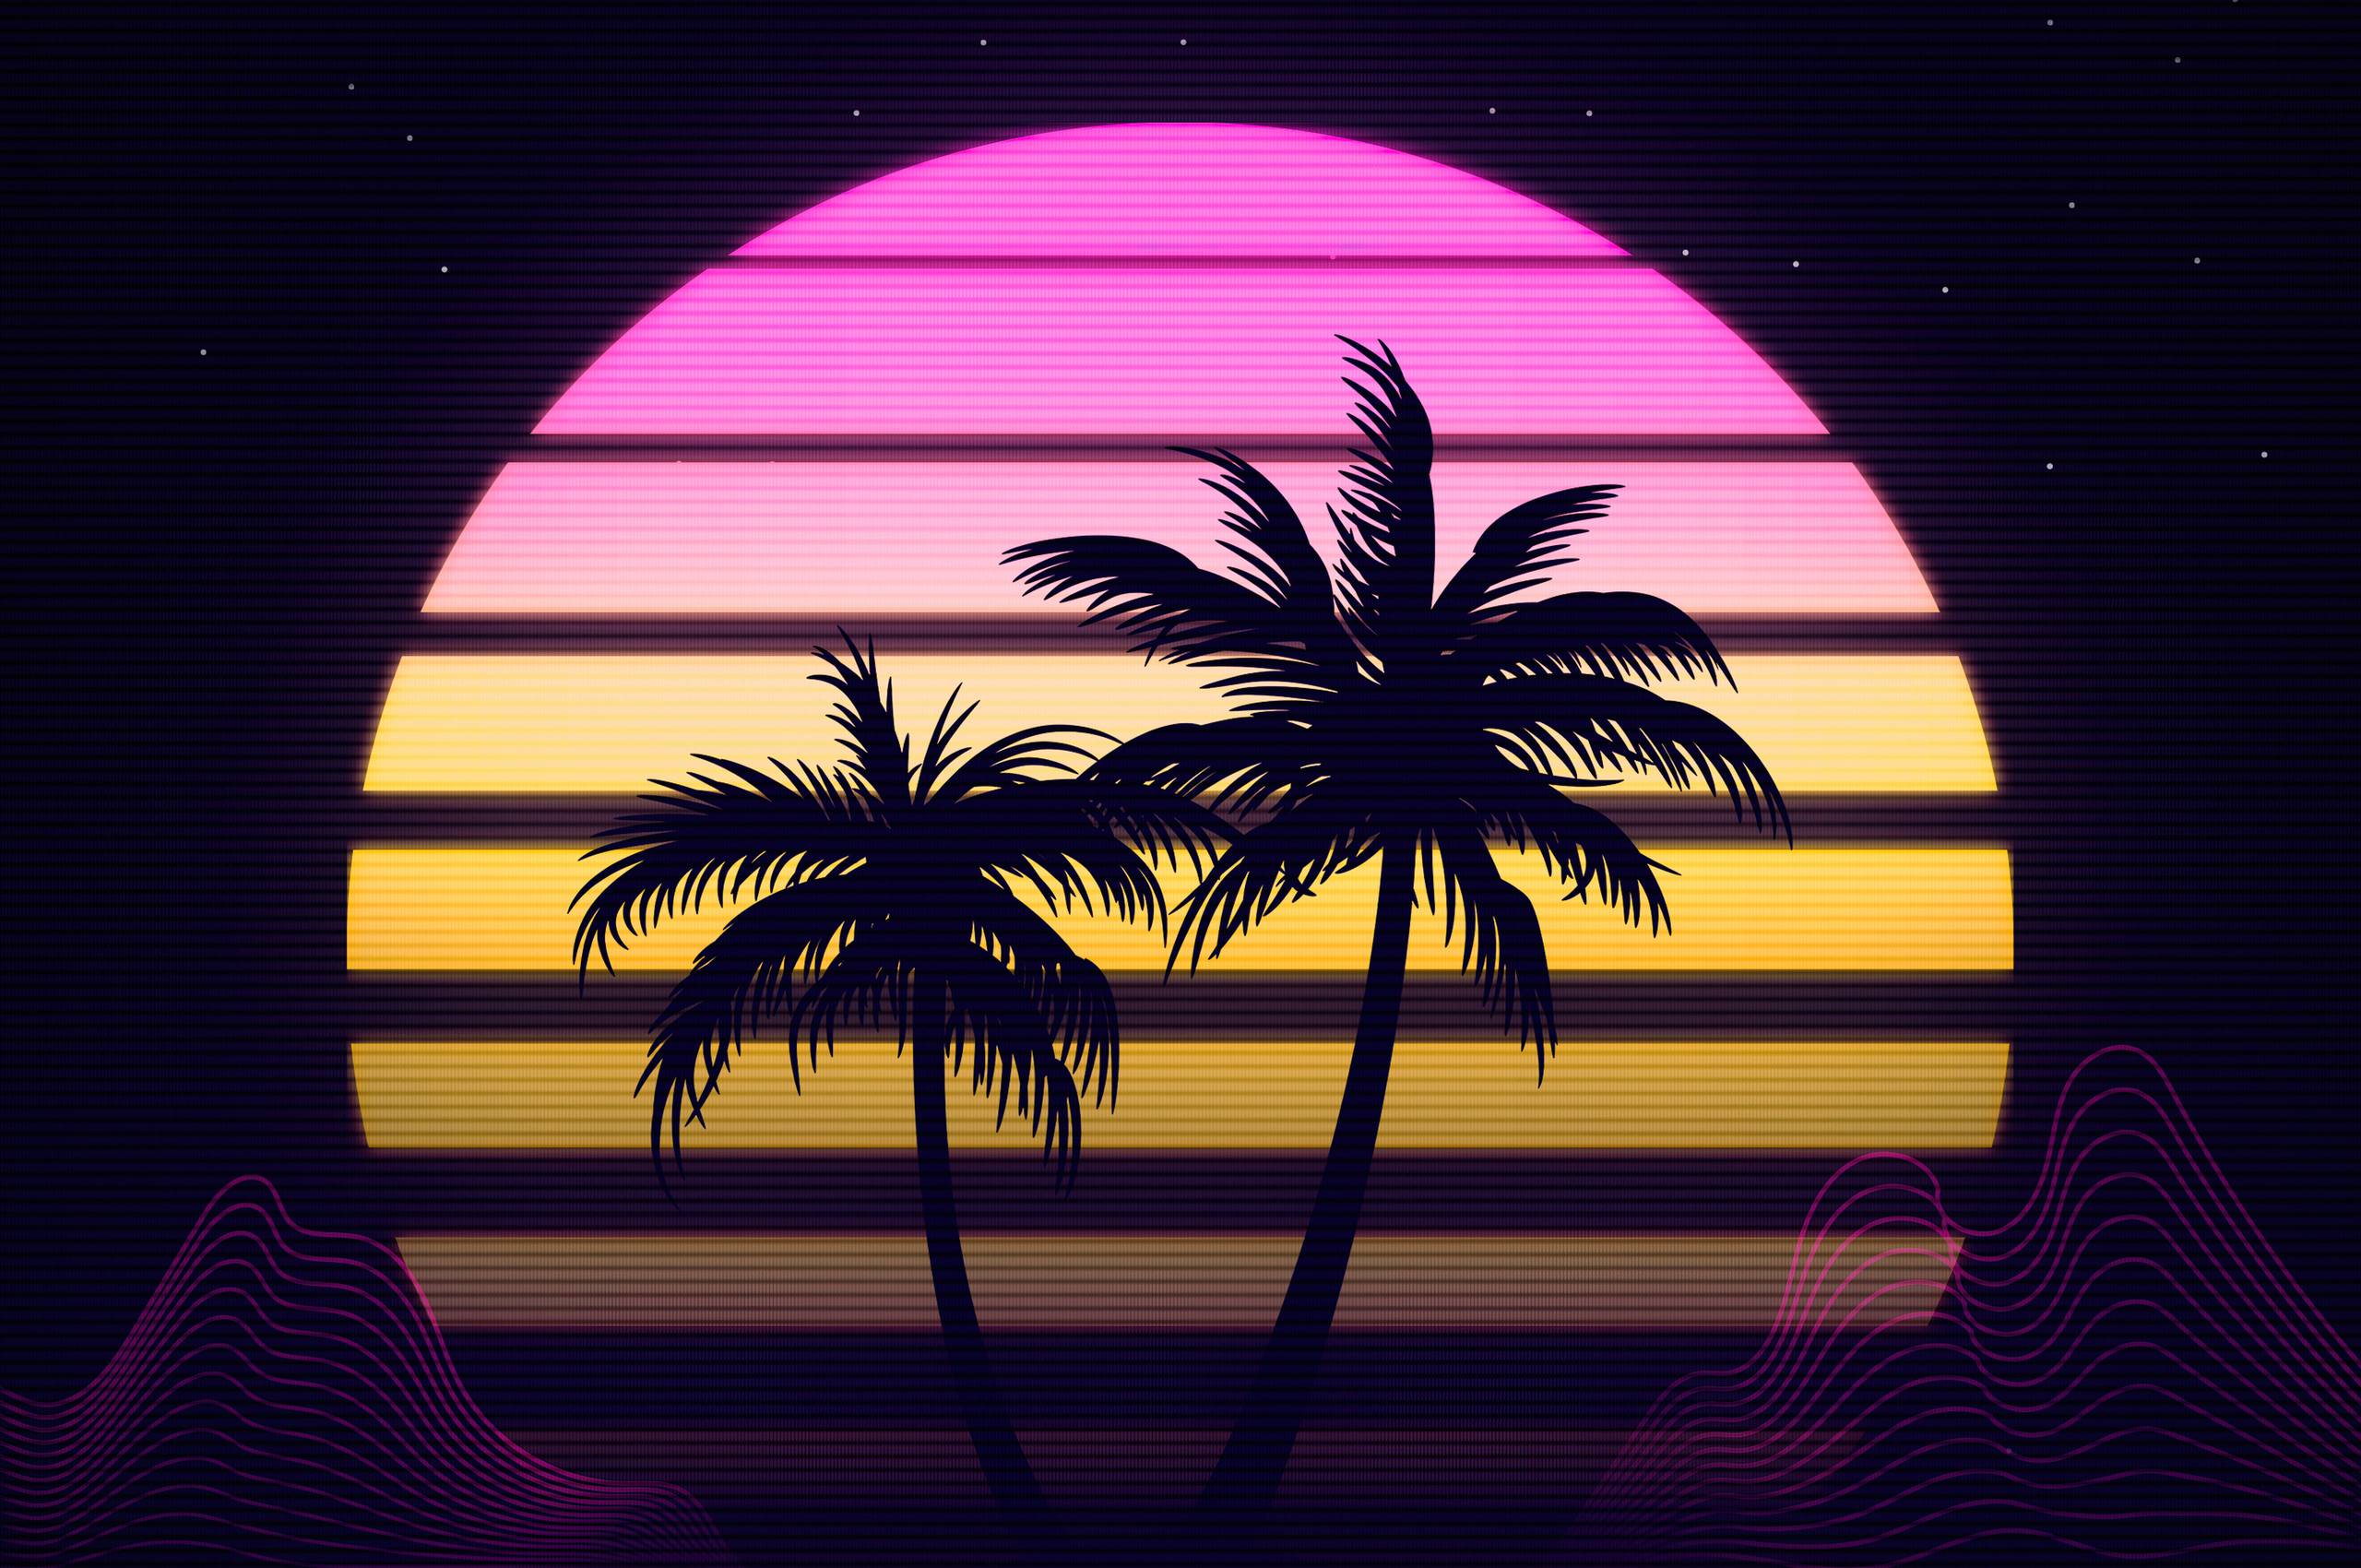 A retro style image of palm trees and the sun - Palm tree